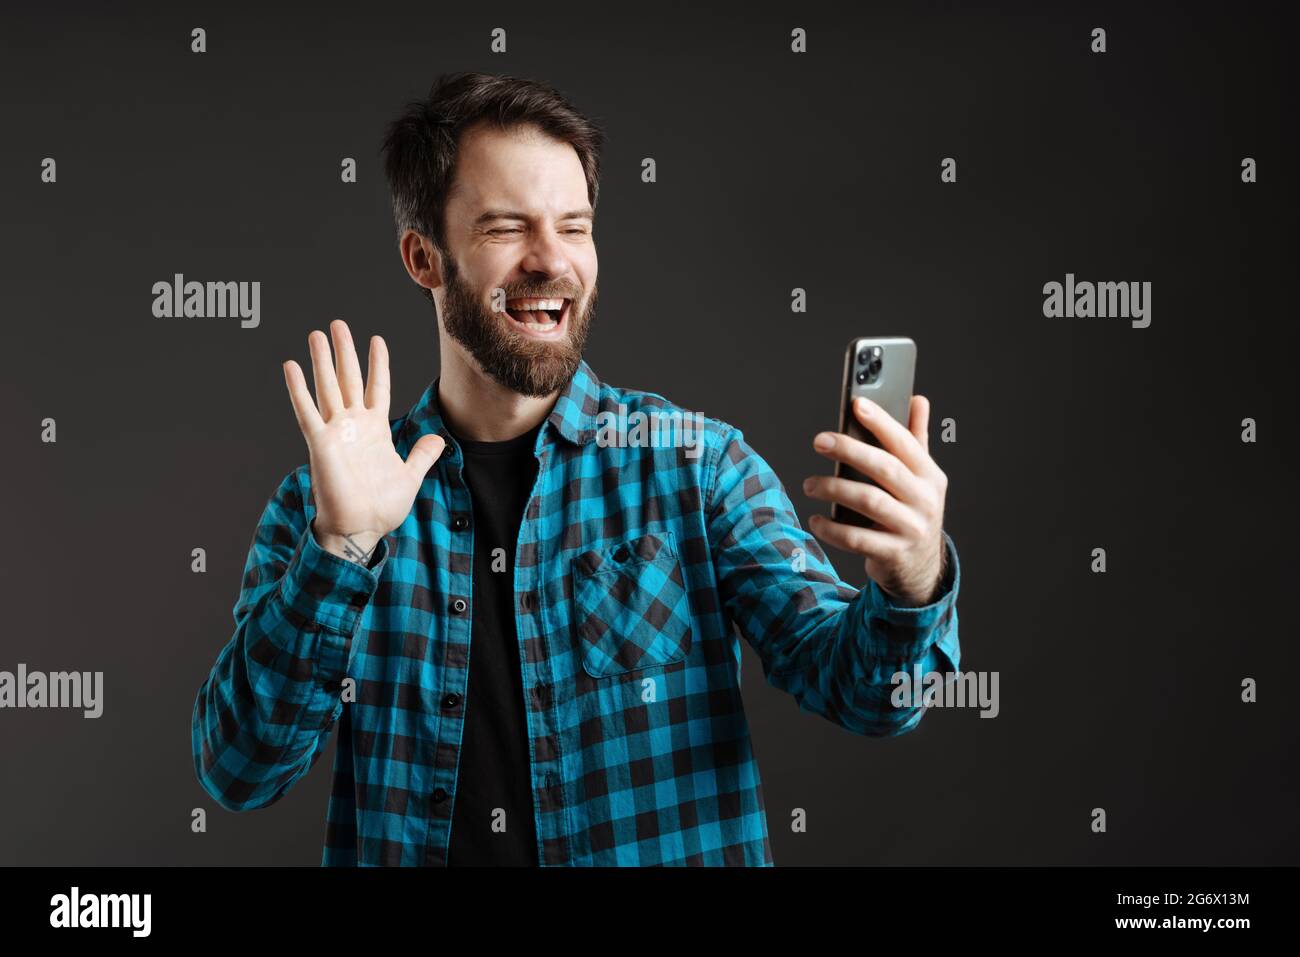 Bearded happy man waving hand while using mobile phone isolated over black background Stock Photo